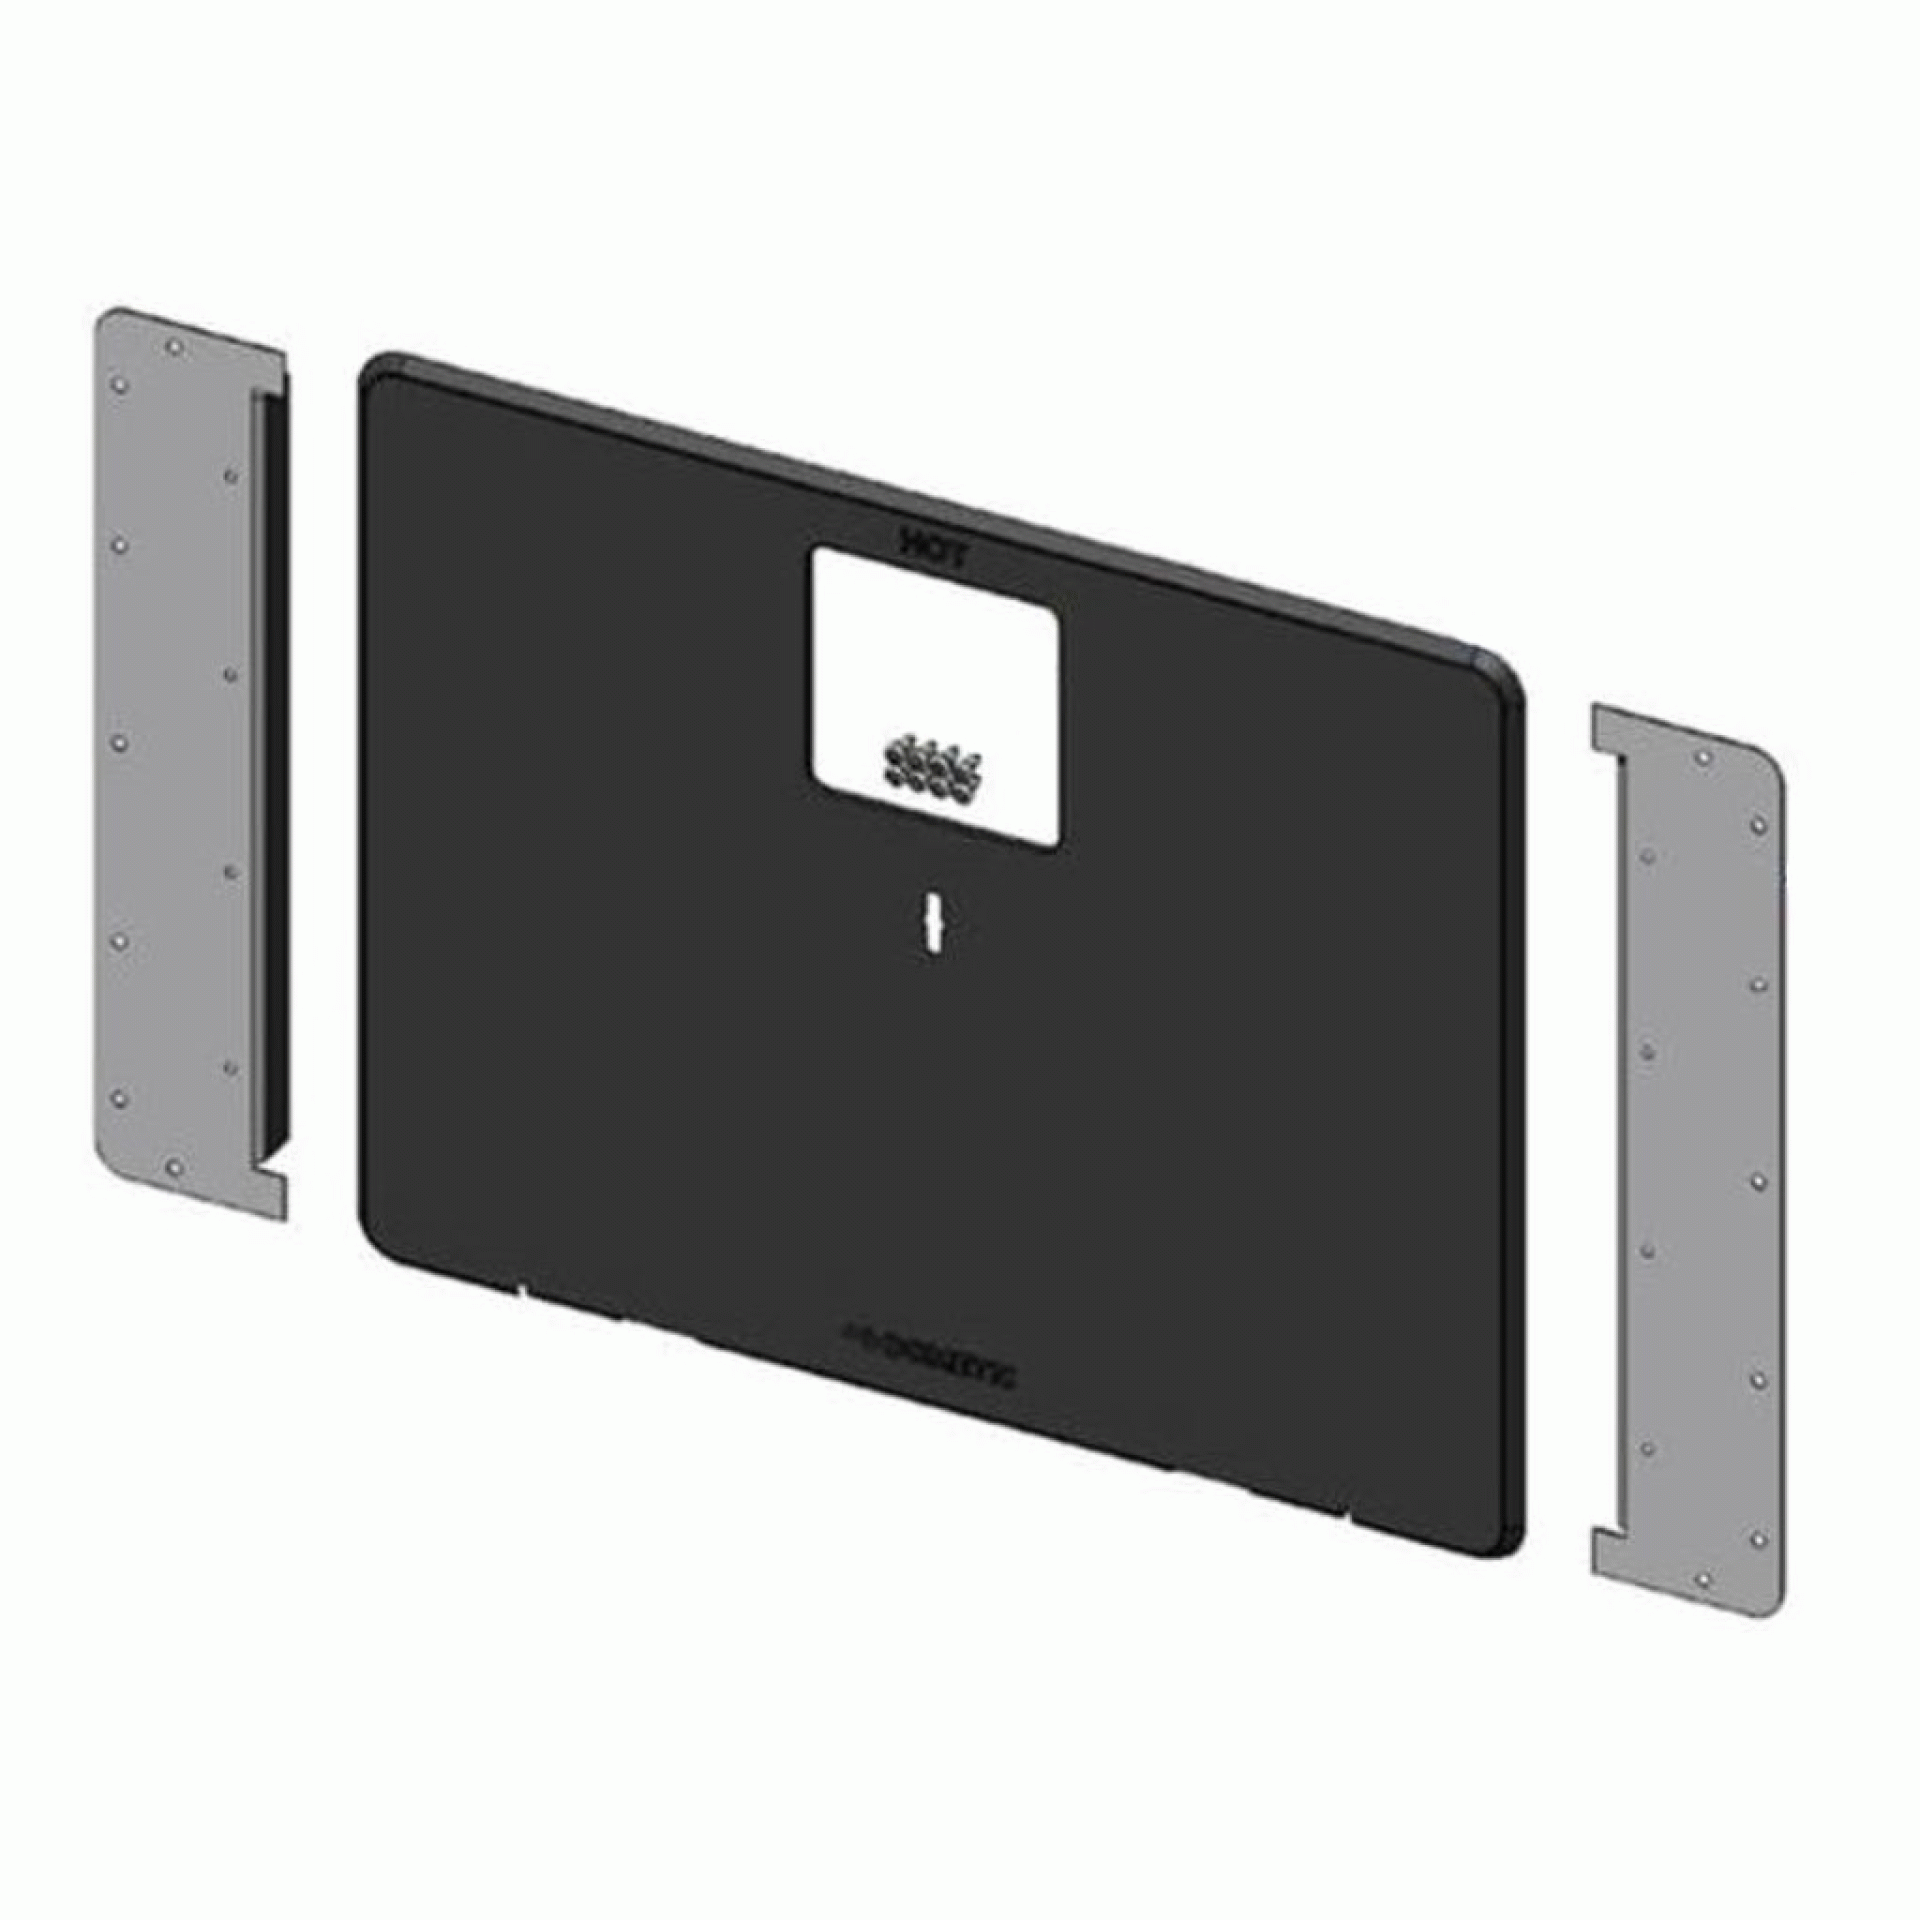 ATWOOD MOBILE PRODUCTS LLC | 94067 | WATER HEATER DOOR CONVERSION KIT-BLACK